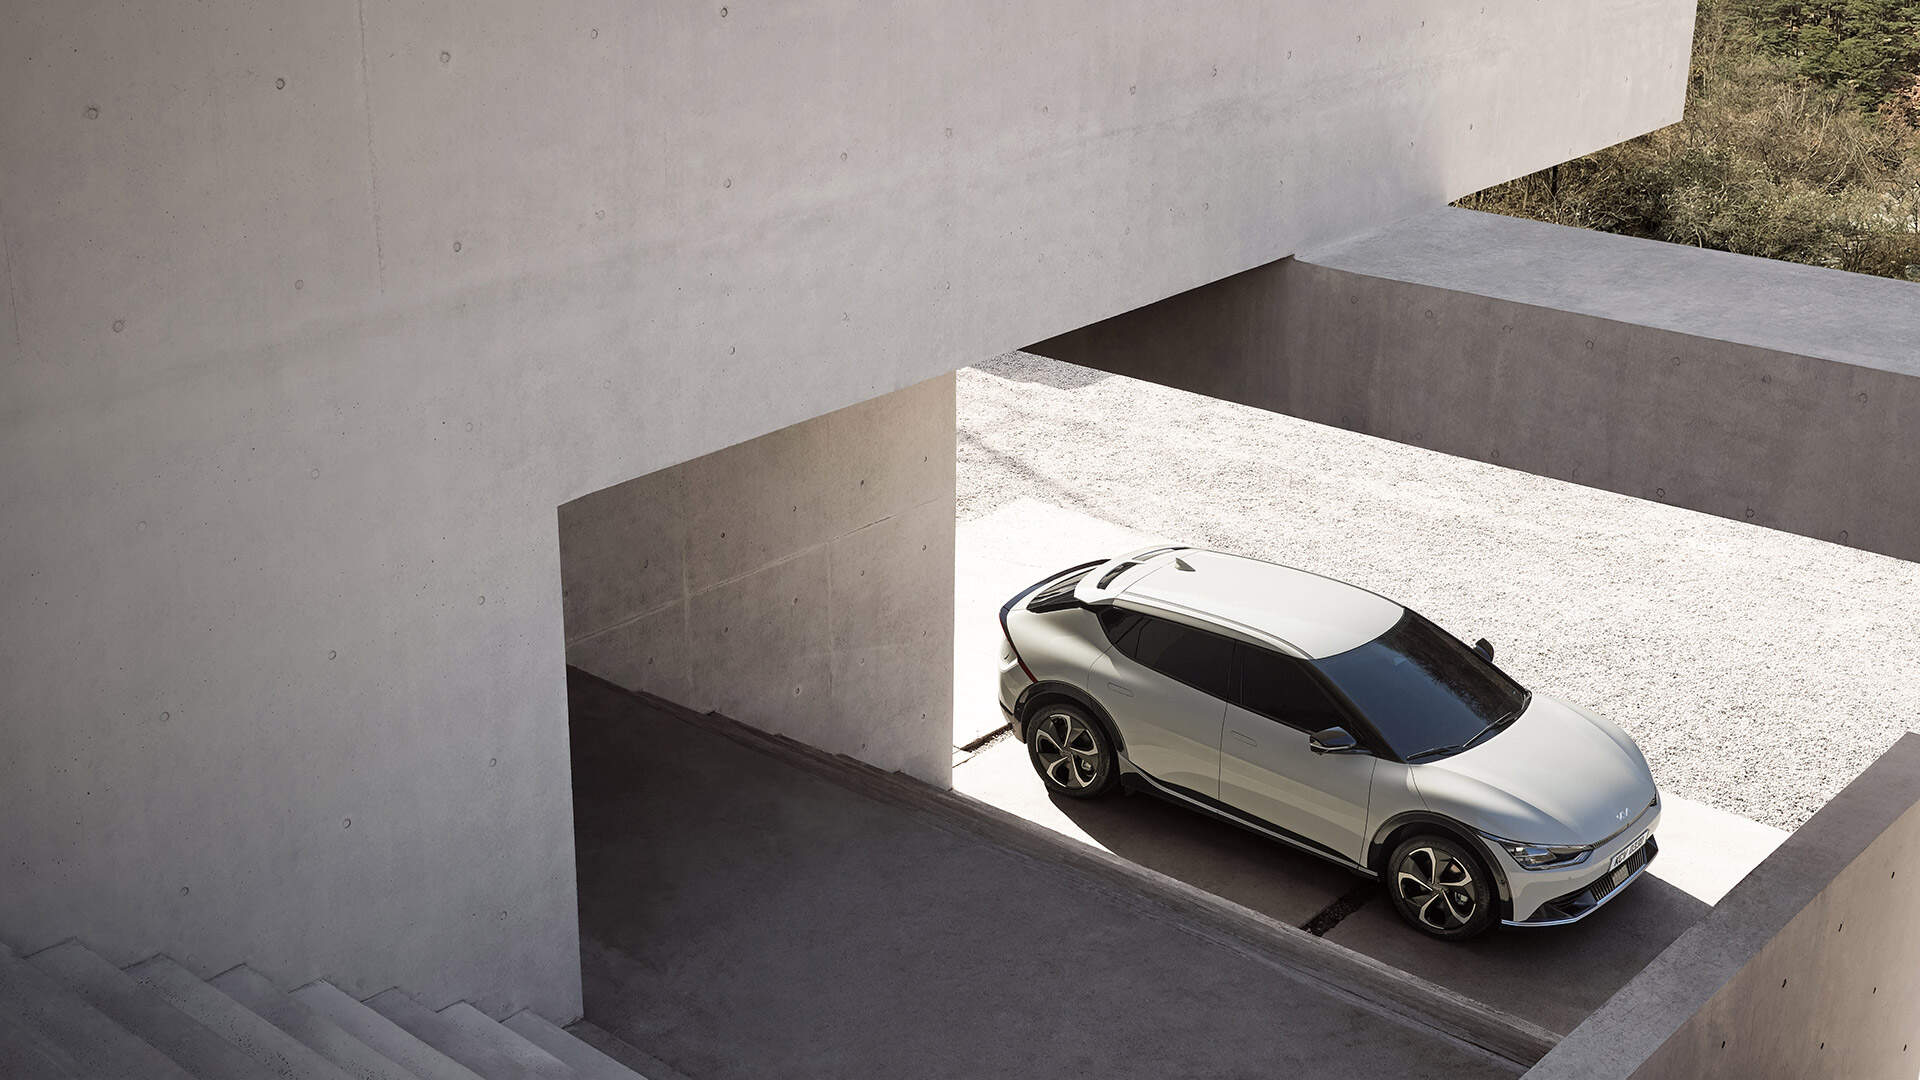 A white Kia EV6 parked in front of a concrete building